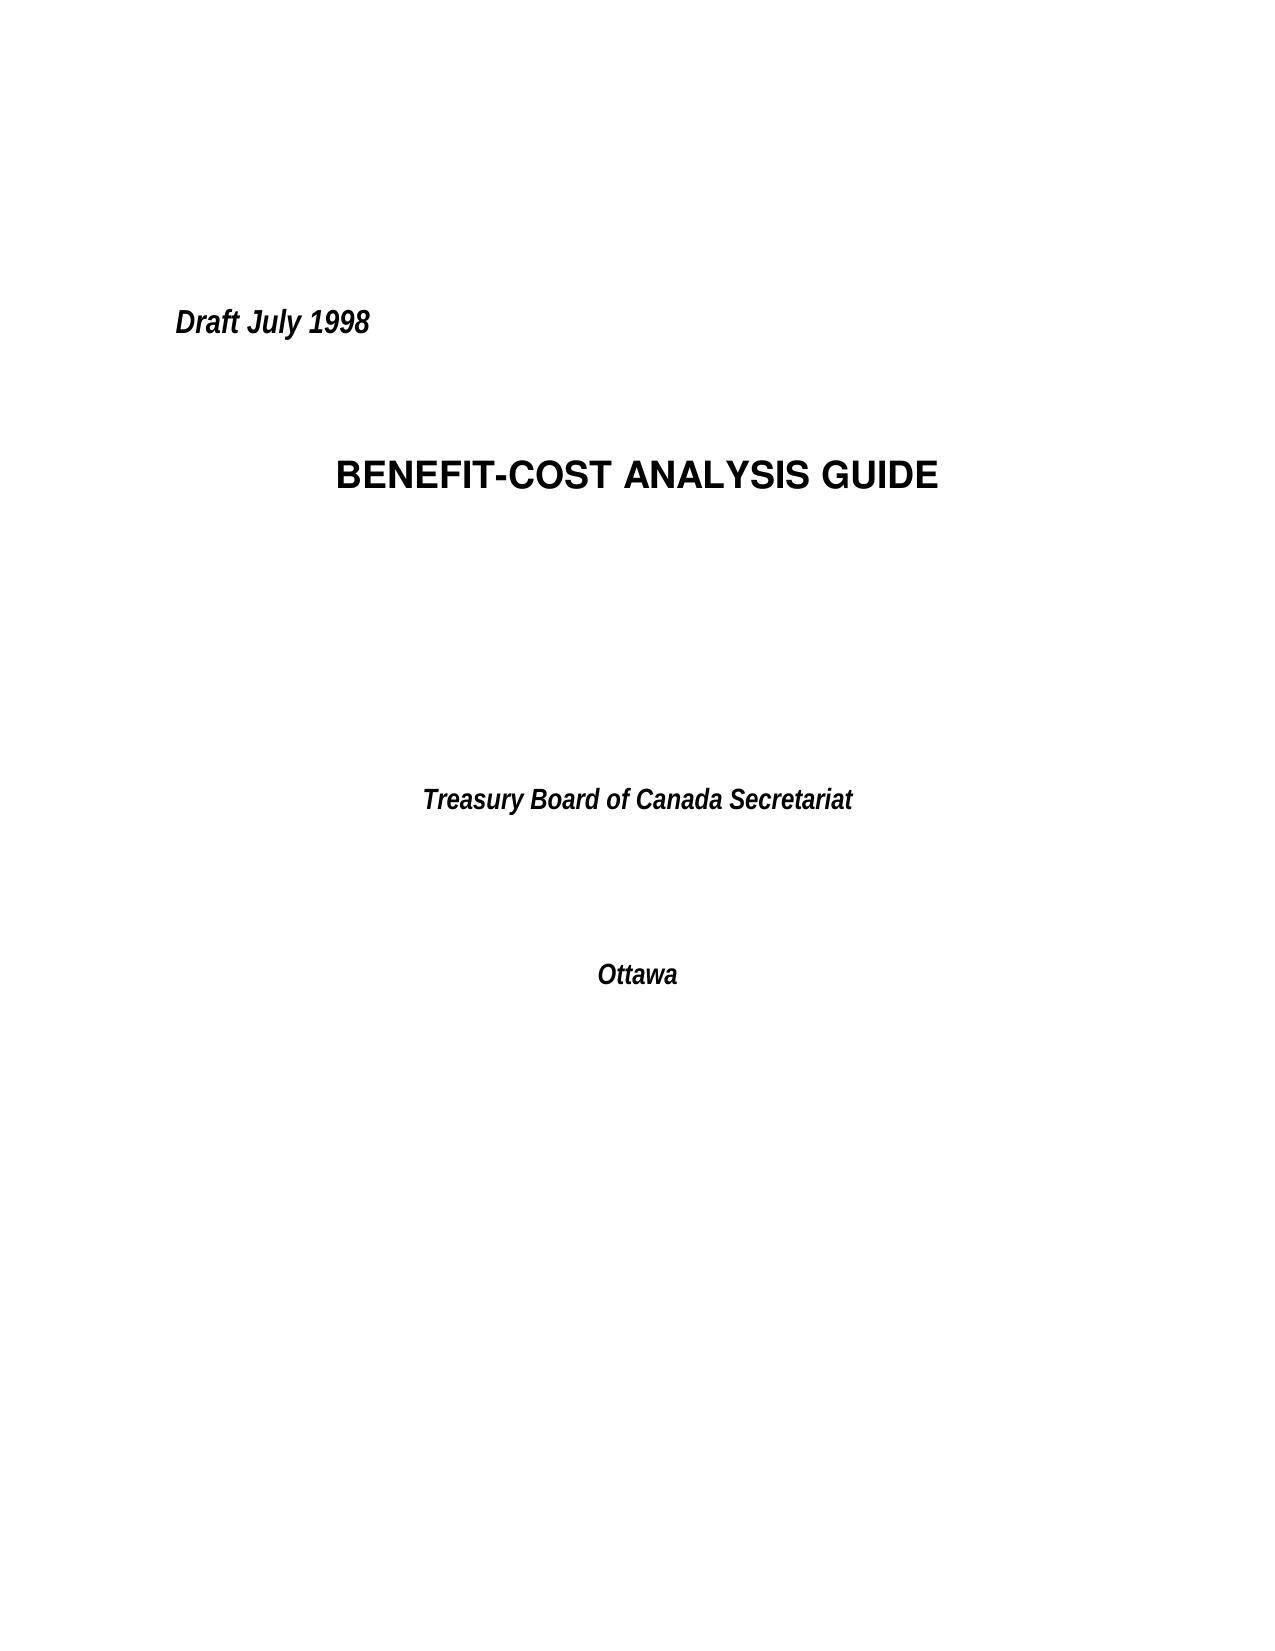 Benfit-Cost Guide 1998.pdf